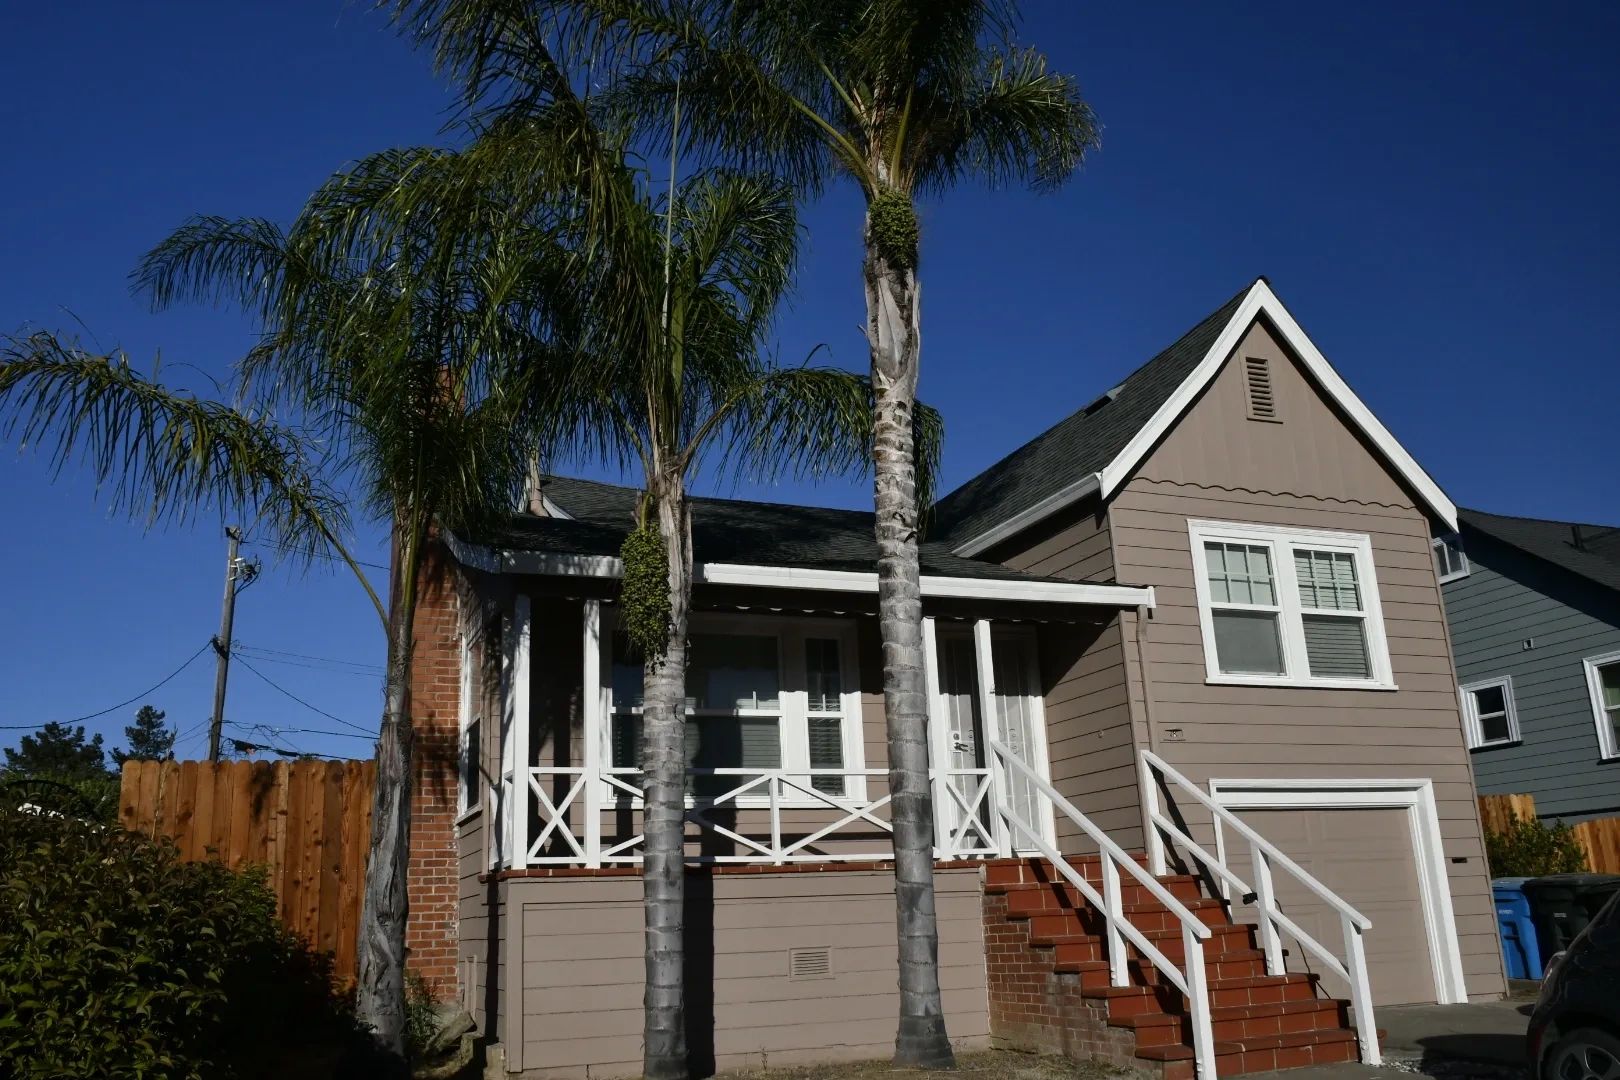 18 Howard Ave Vallejo
For Sale at $459,000
This is a very sweet 1940's home.